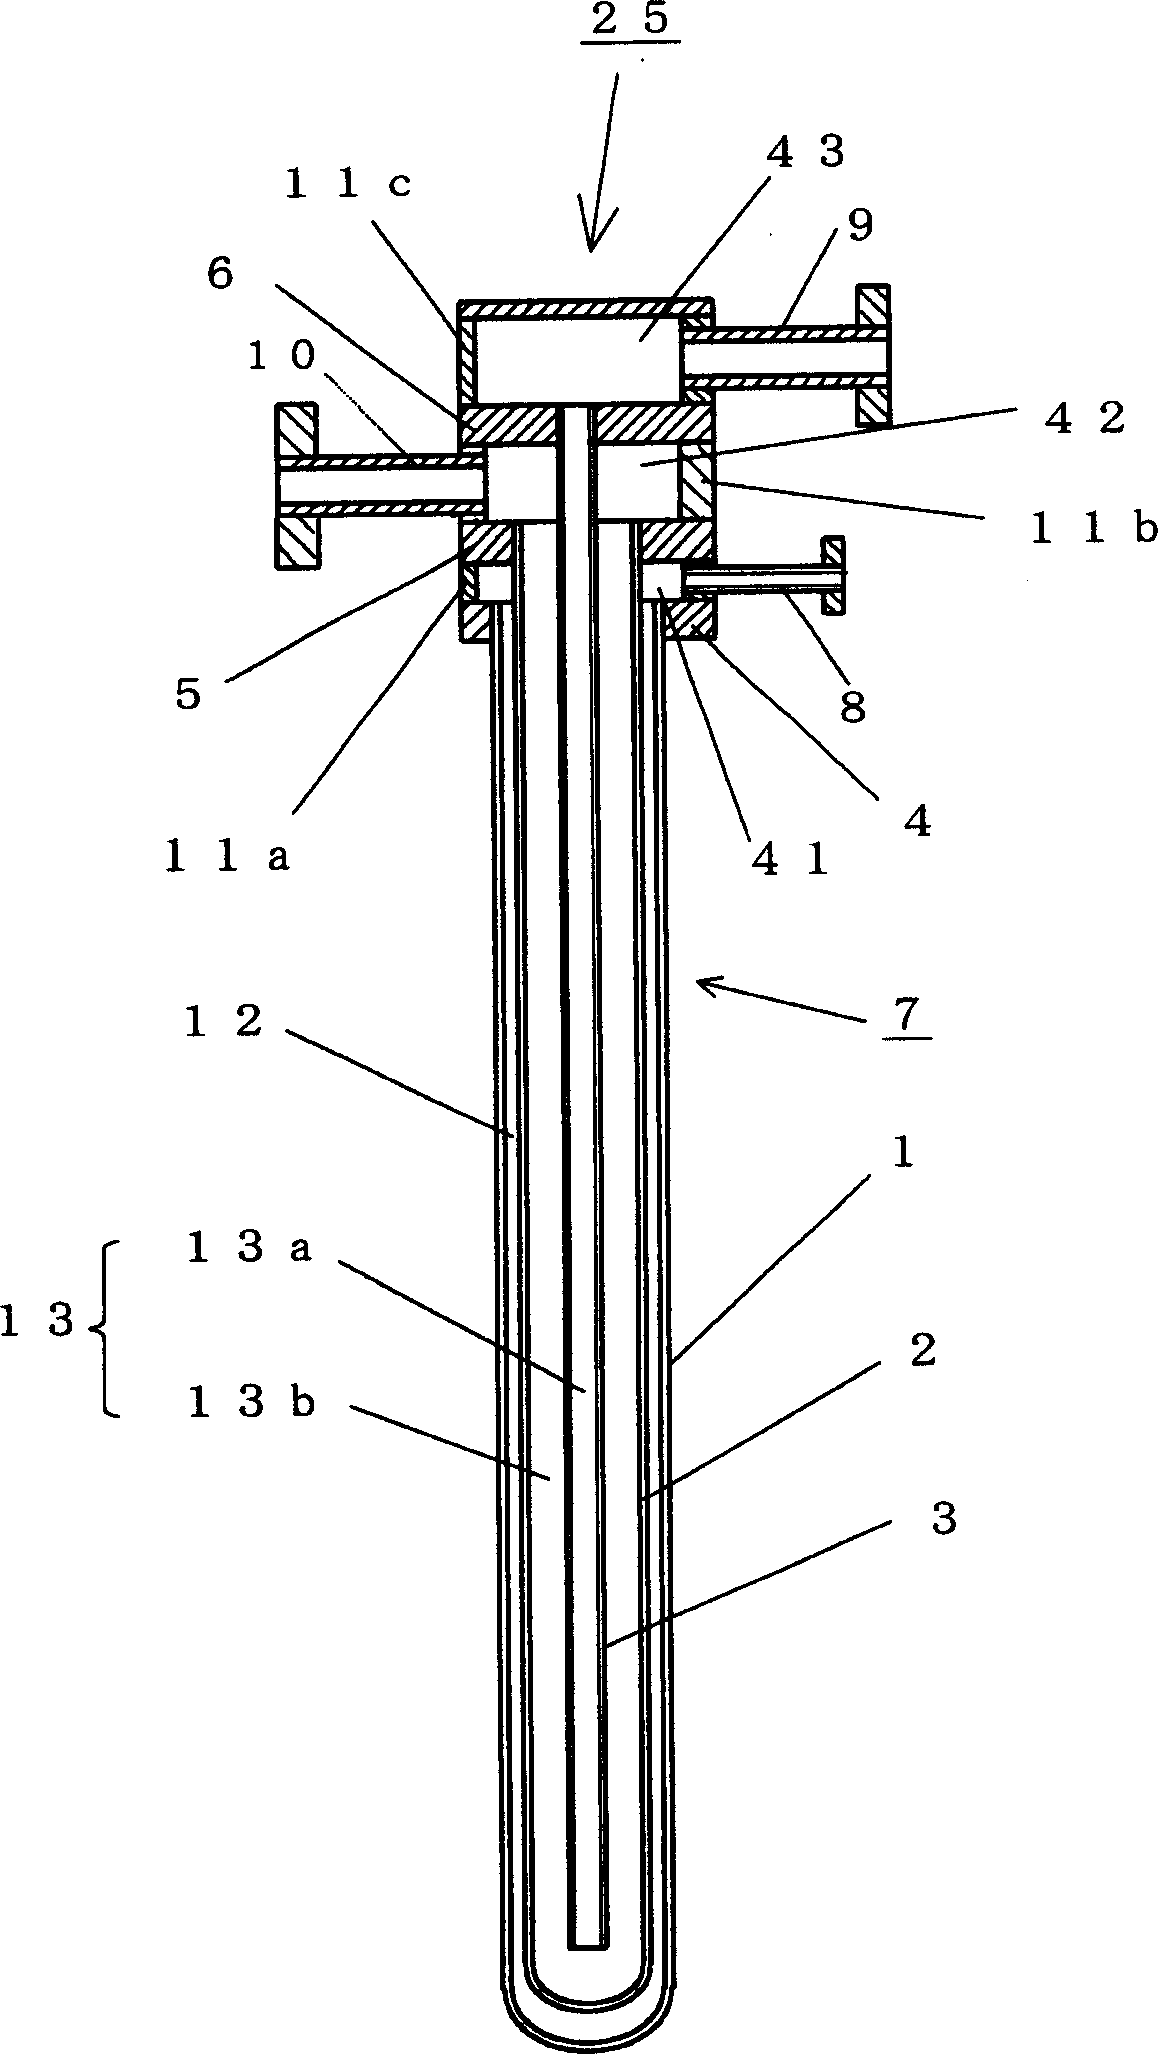 Cooling device and thin strap continuous casting apparatus and cooling method for casting thin strap